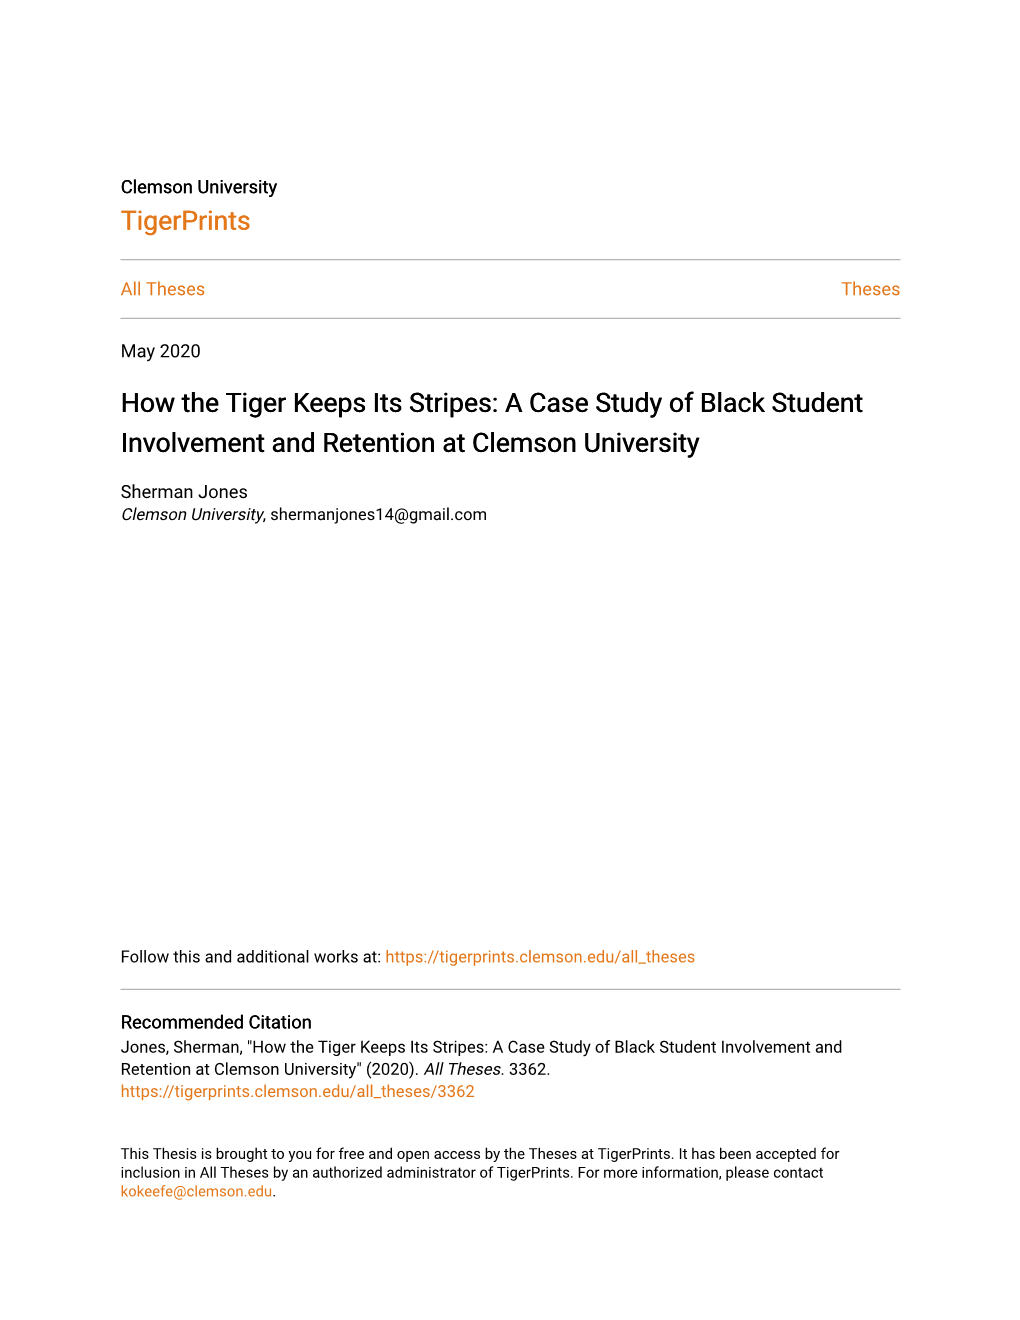 How the Tiger Keeps Its Stripes: a Case Study of Black Student Involvement and Retention at Clemson University